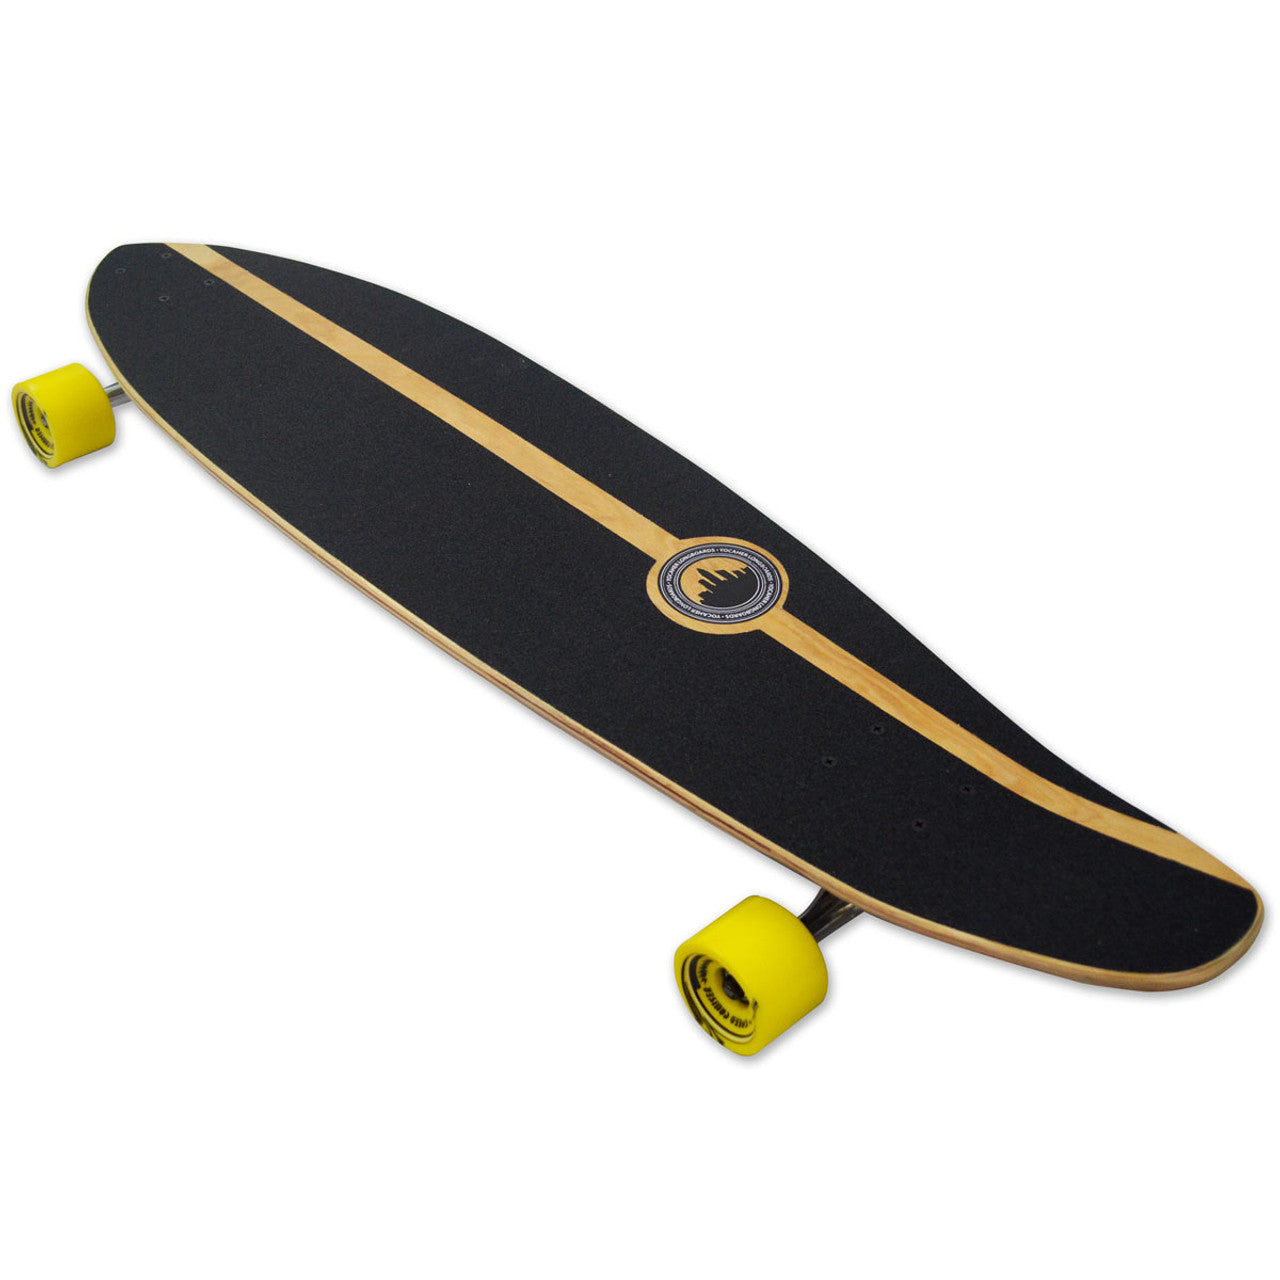 Yocaher Kicktail Longboard Complete - Earth Series - Ripple